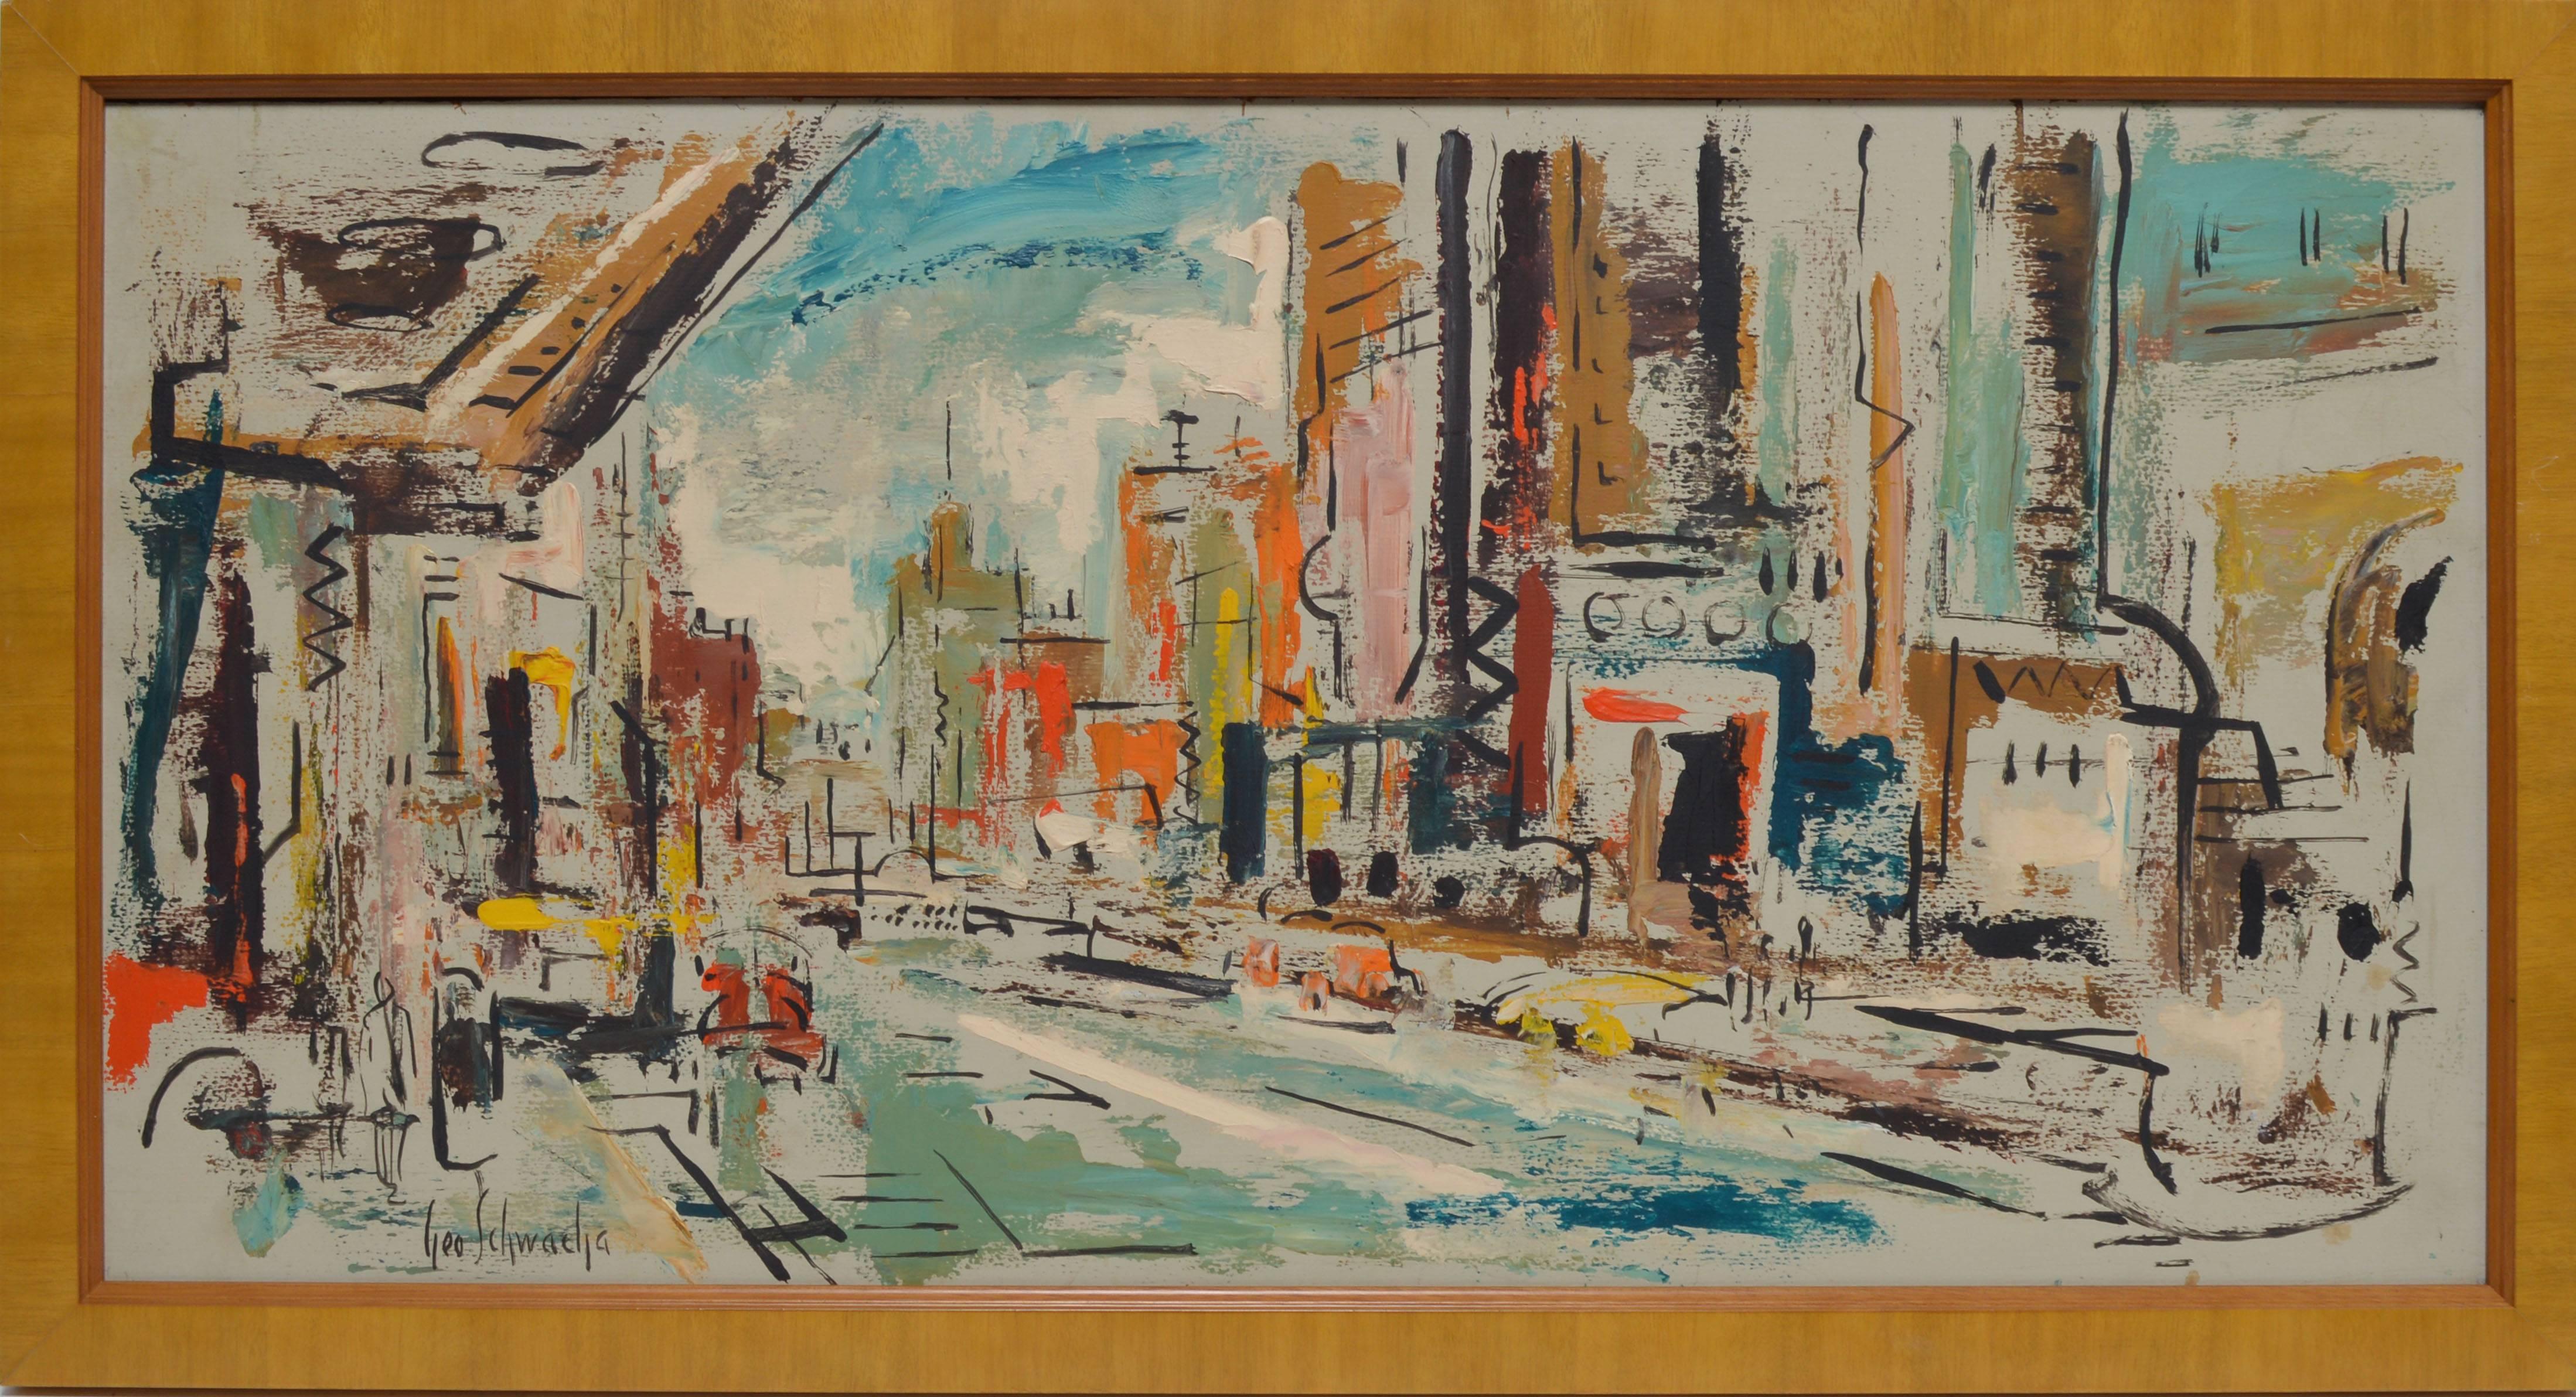 Modernist view of New York City by George Schwacha Jr  (1908 - 1986).  Oil on board, circa 1950.  Signed lower right, "Geo Schwacha".  Displayed in a natural wood frame.  Image size, 24"L x 12"H, overall 26"L x 14"H.